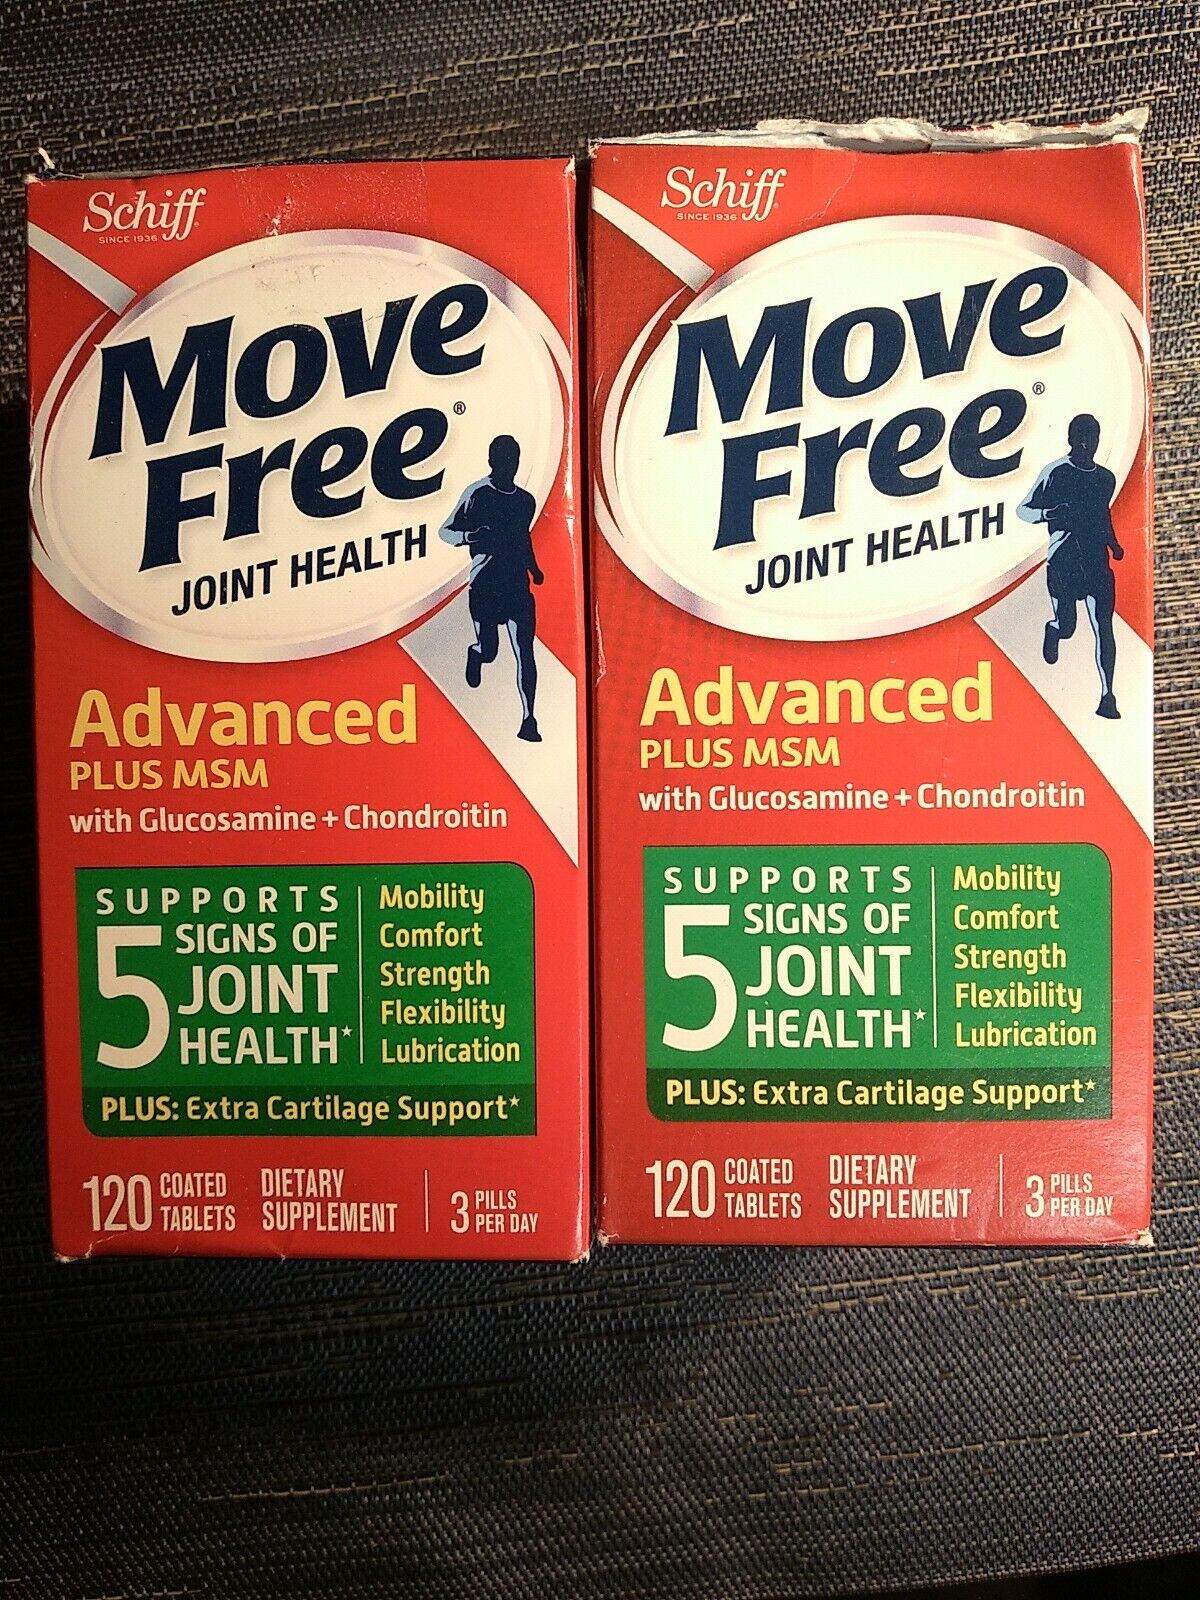 2-BOXS !!! Schiff Move Total Joint Health Advanced Plus MSM - 120 Tablets